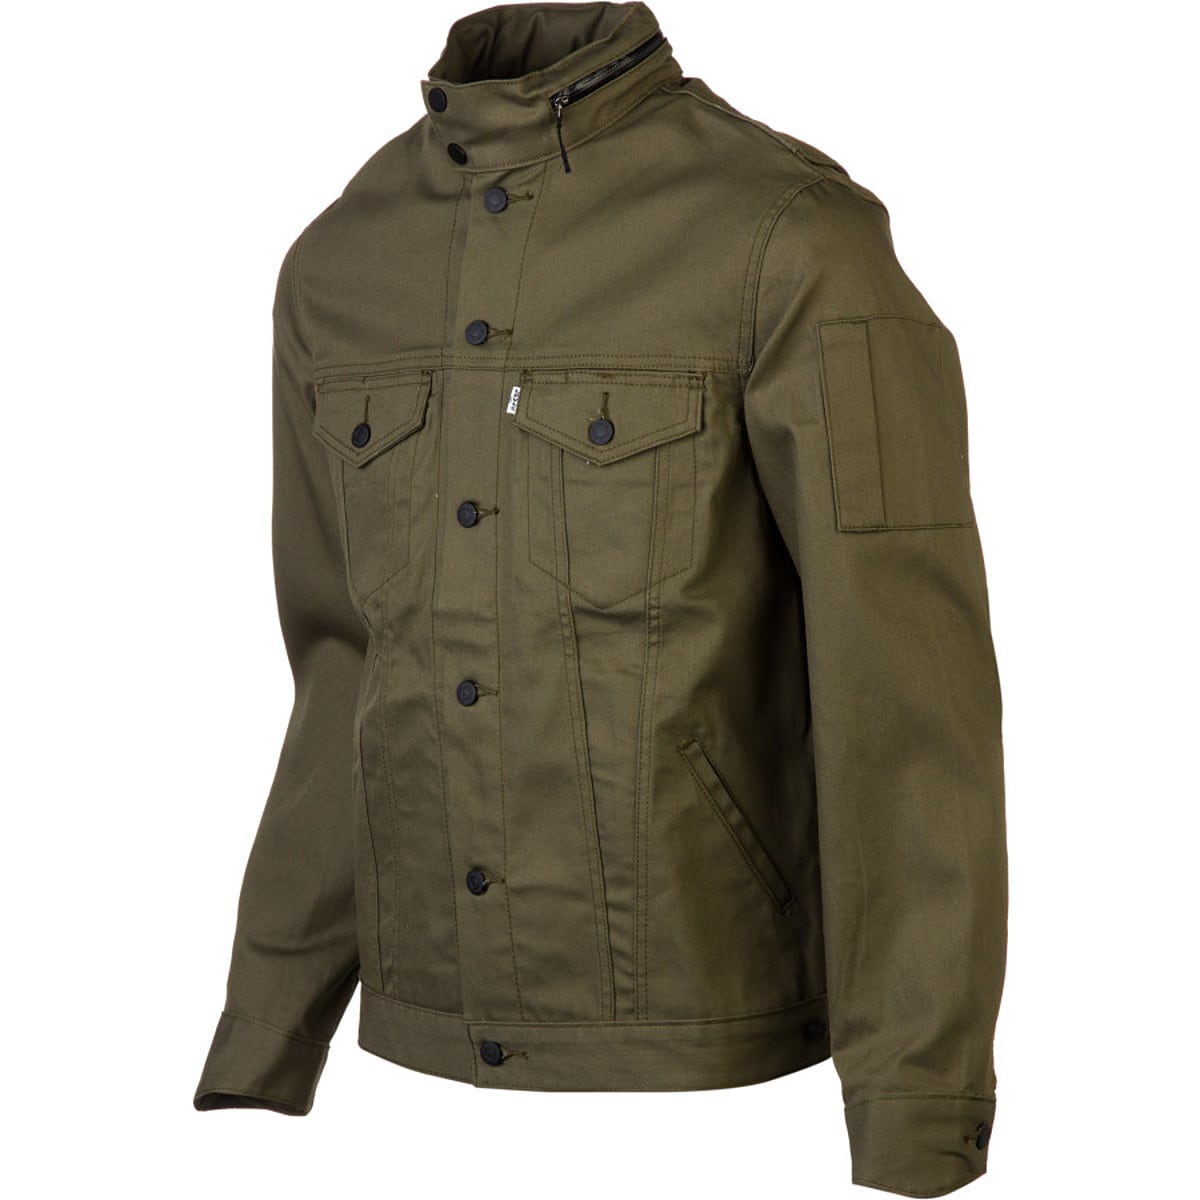 Levi's fishing jacket in green with collar